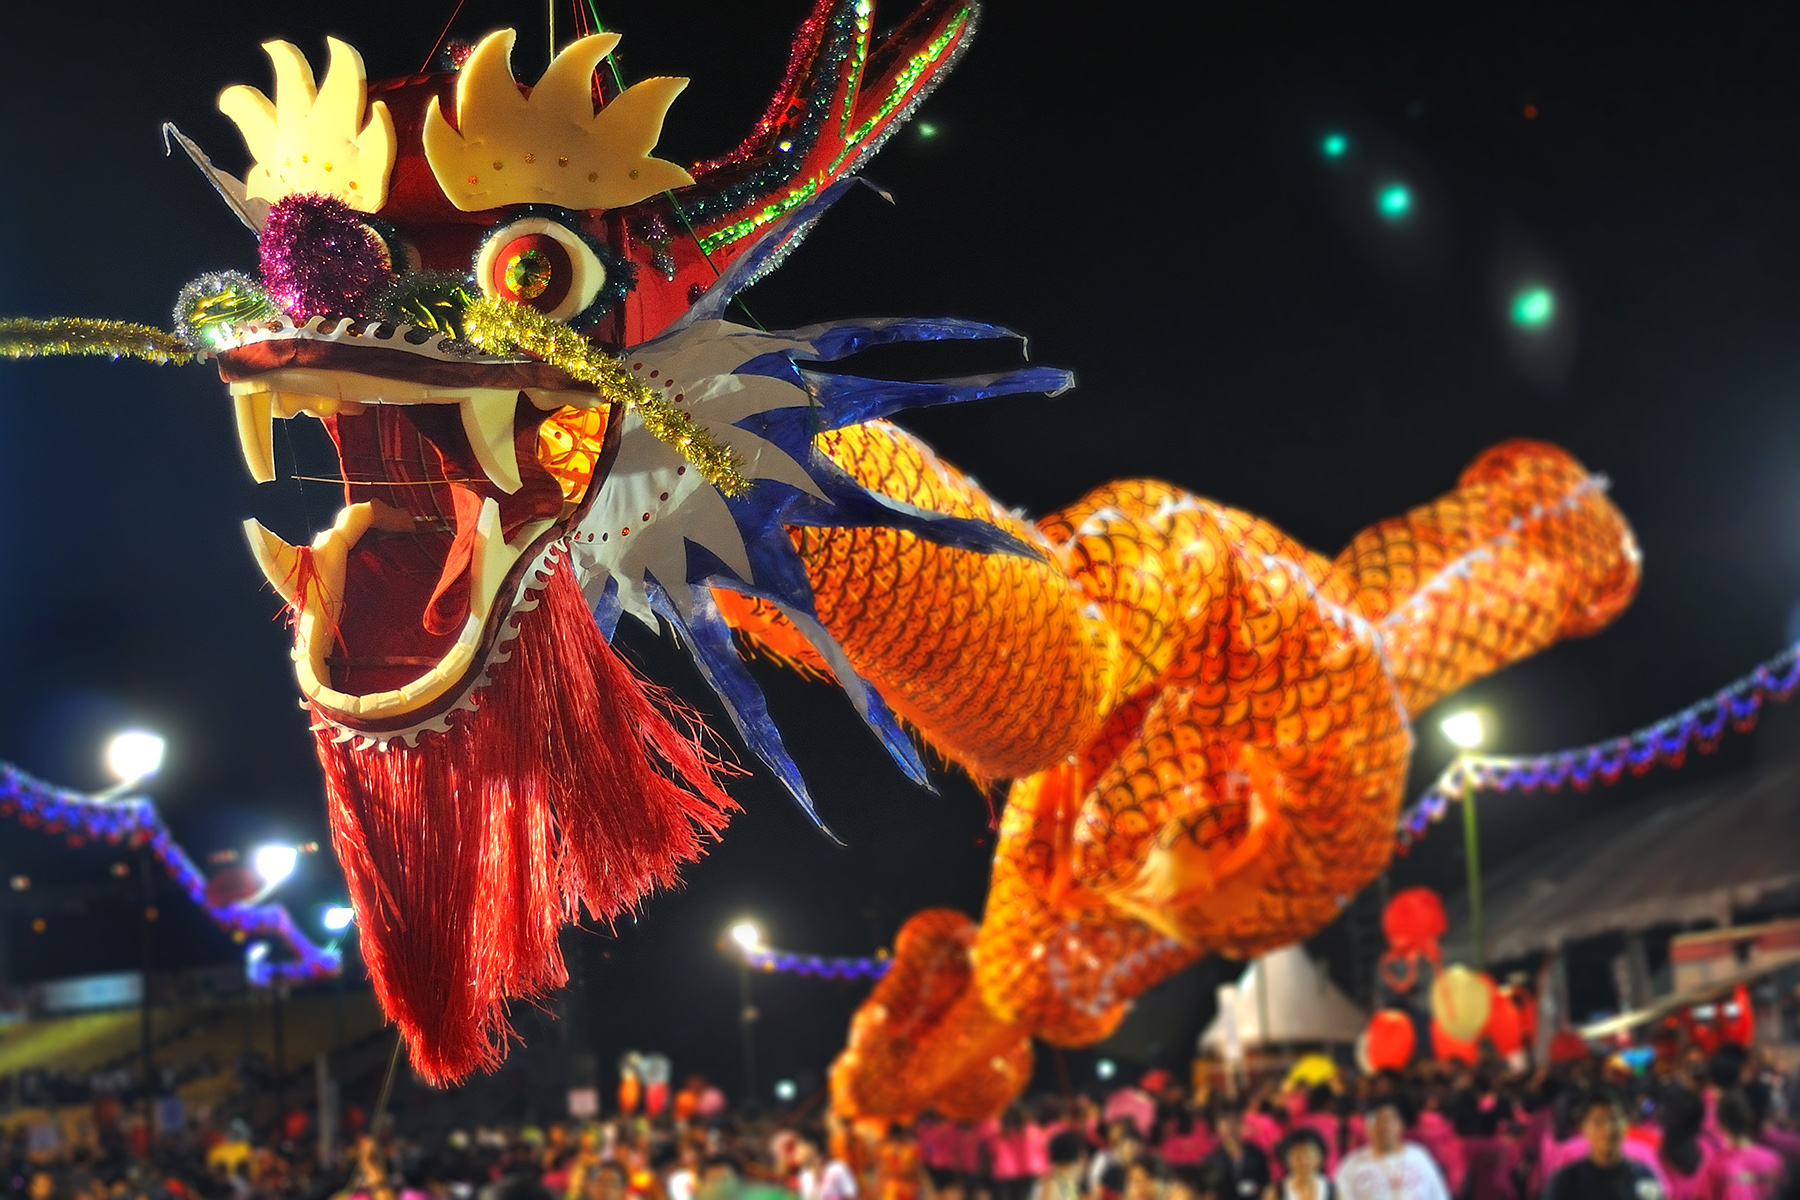 The longest floating air dragon in the Singapore Chingay Parade during Chinese New Year celebrations

